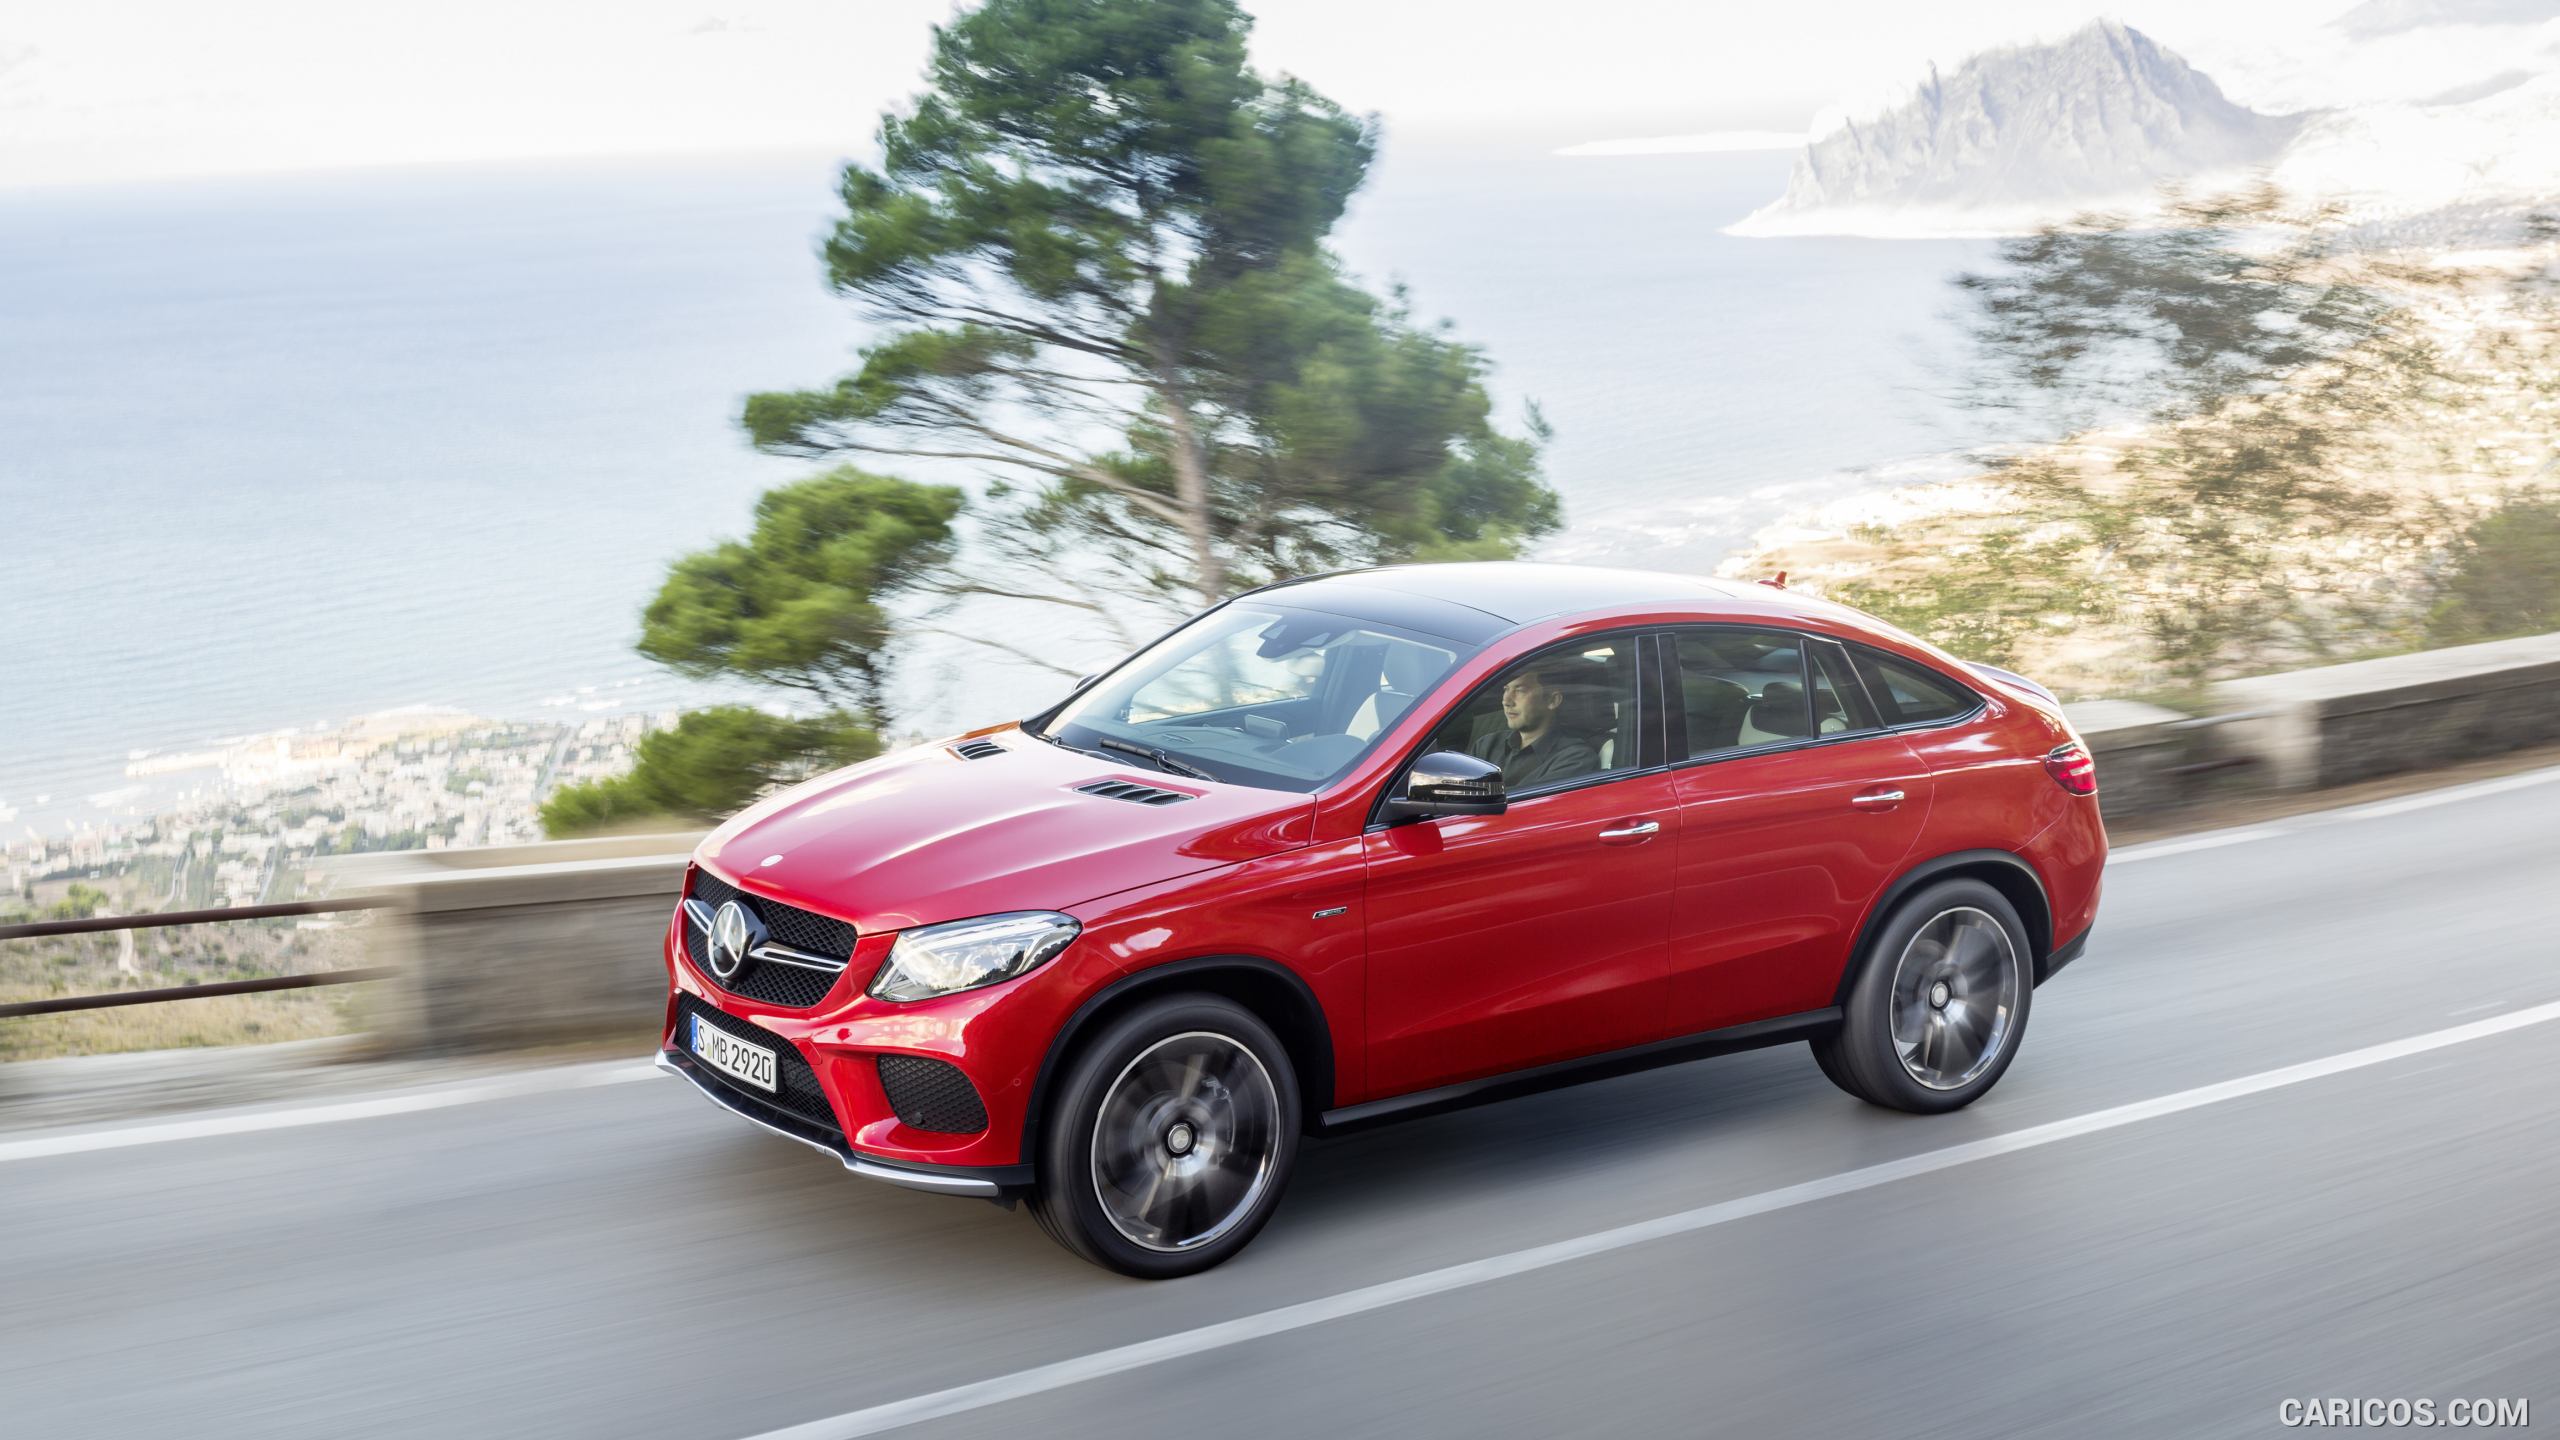 2016 Mercedes-Benz GLE 450 AMG Coupe 4MATIC (Designo Hyacinth Red Metallic) - Side, #13 of 115